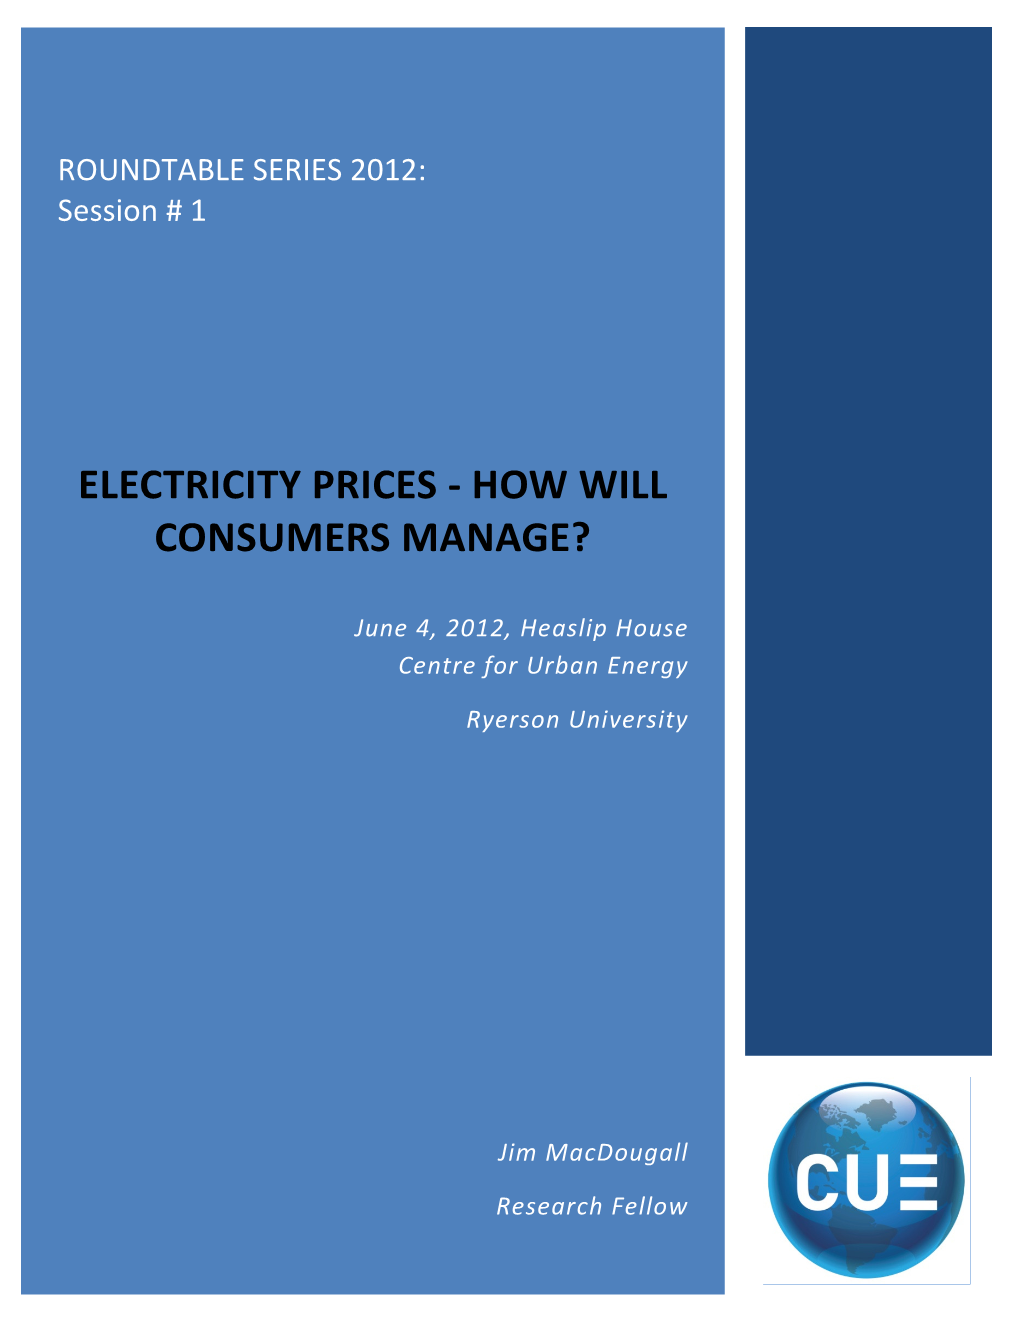 Electricity Prices - How Will Consumers Manage?